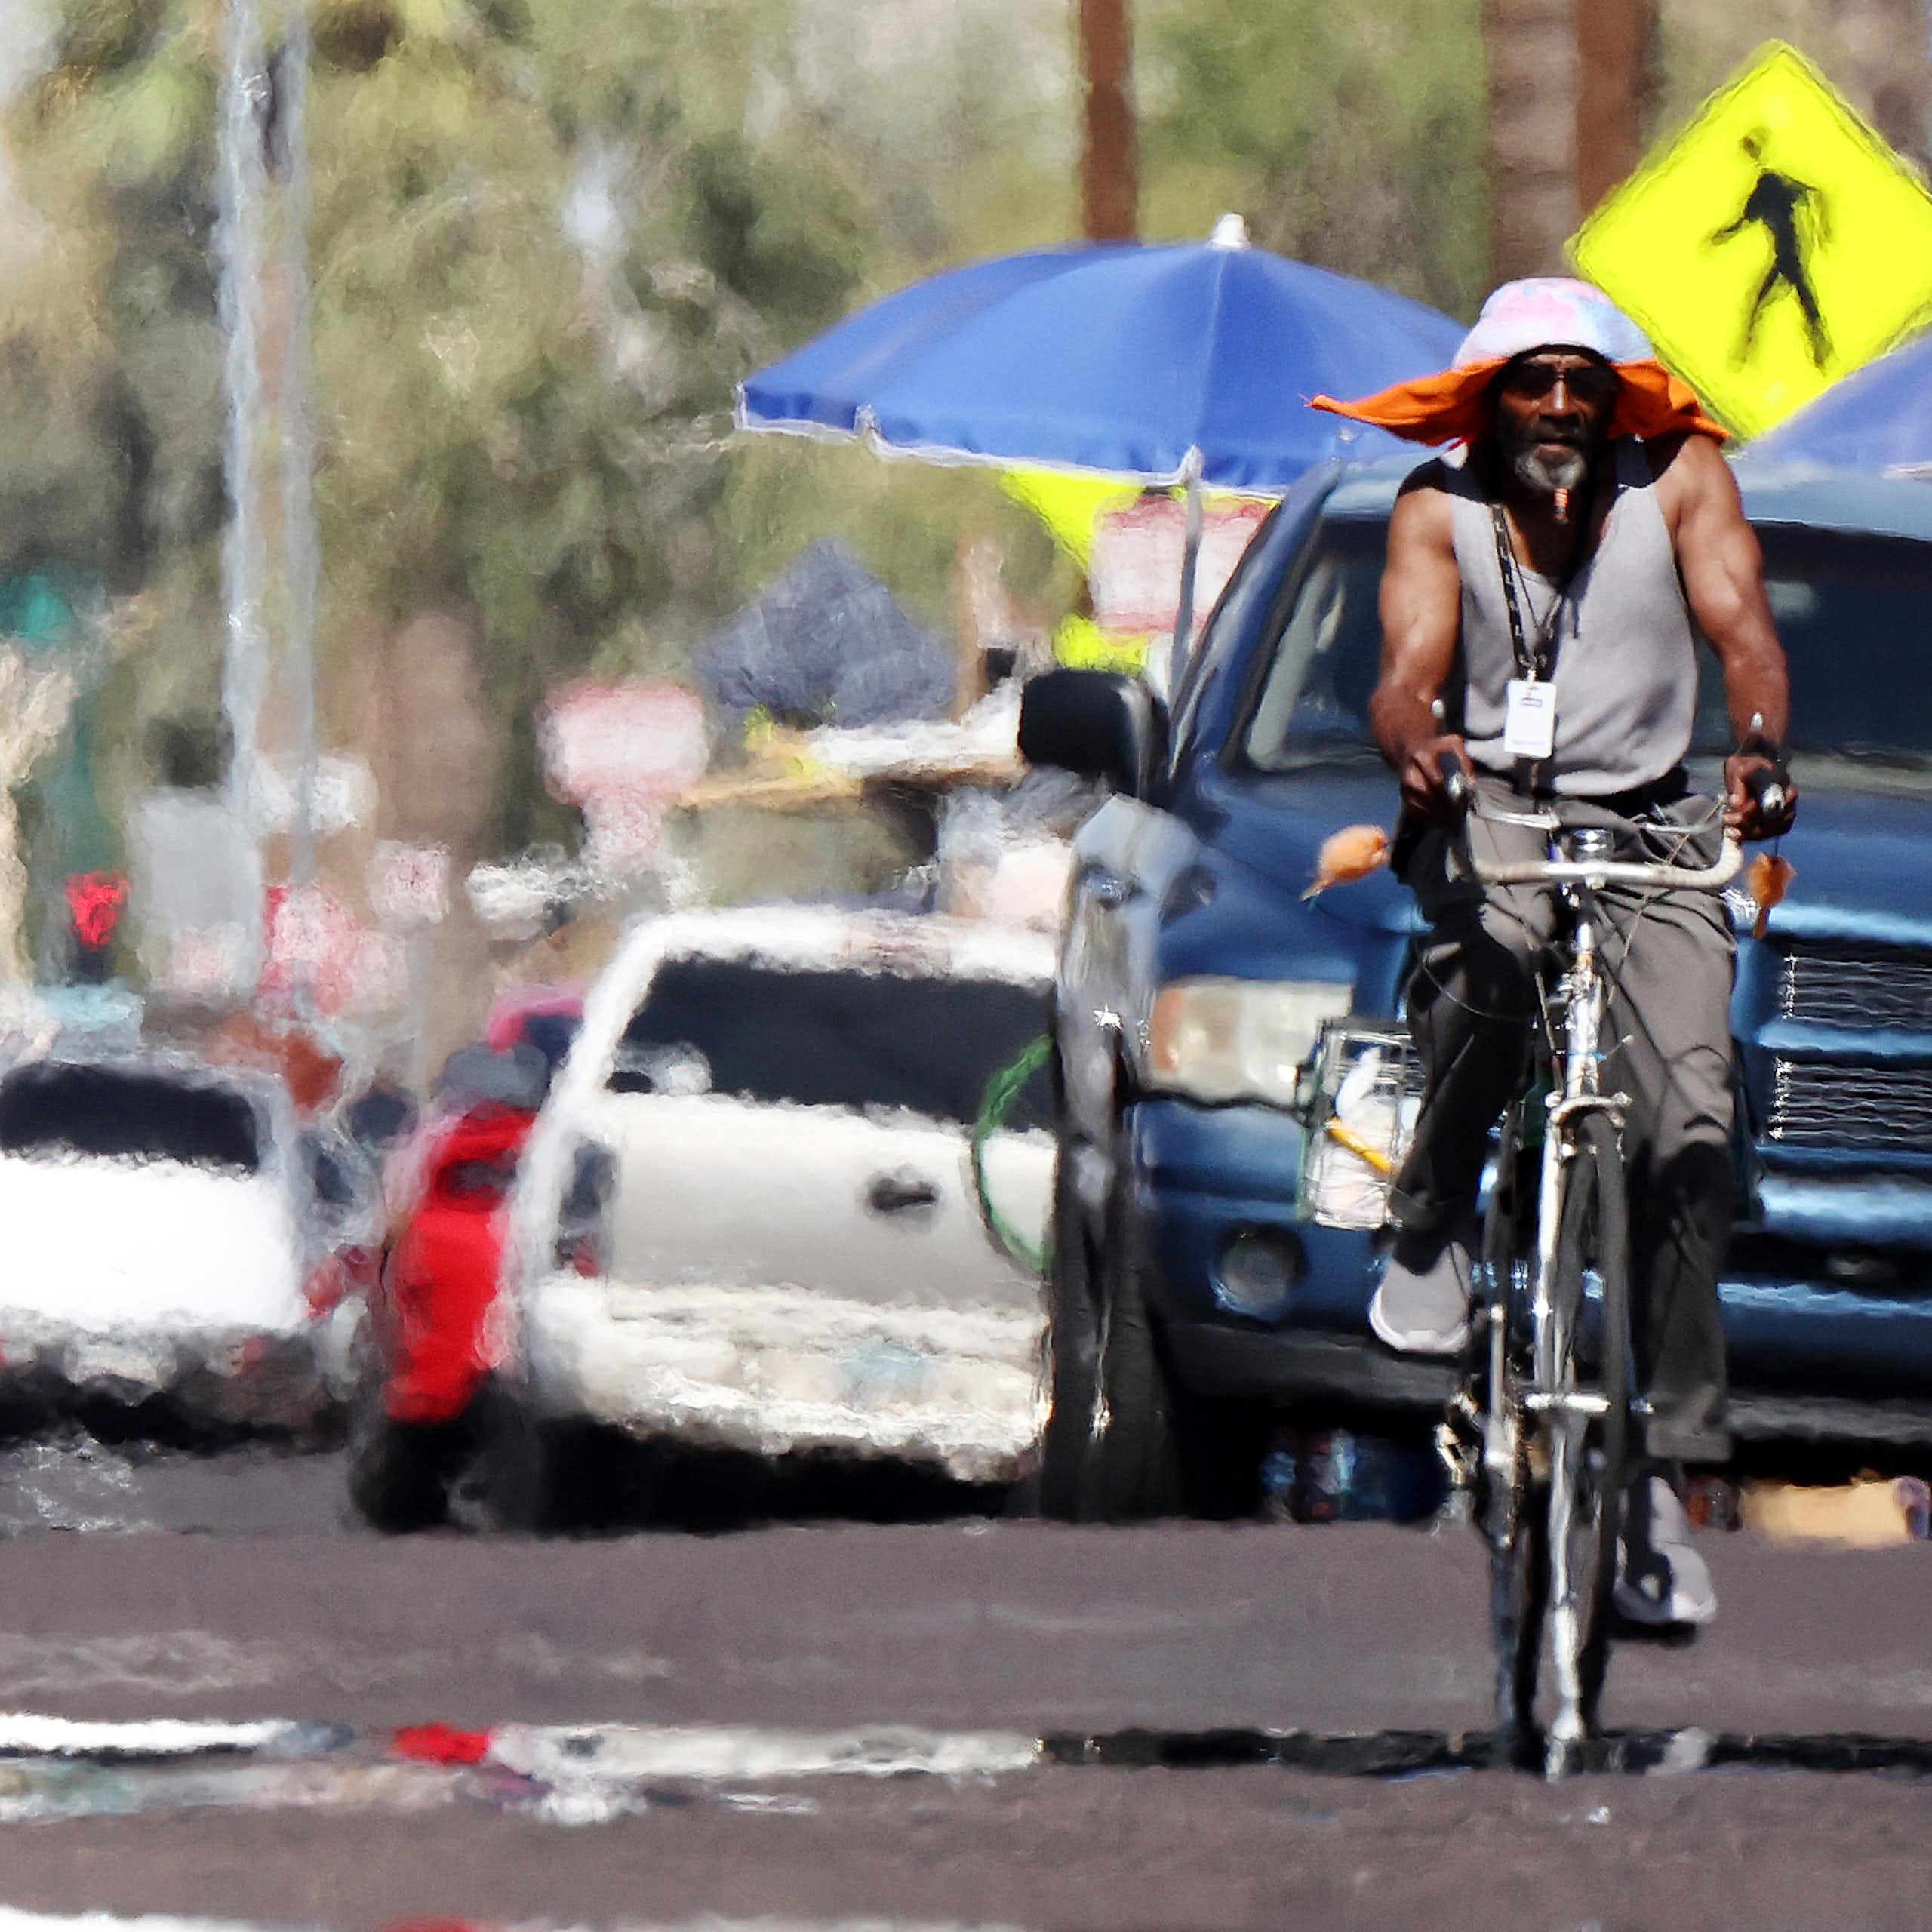 A man with a large hat rides a bike a on street with heat rising, creating a wavy view.